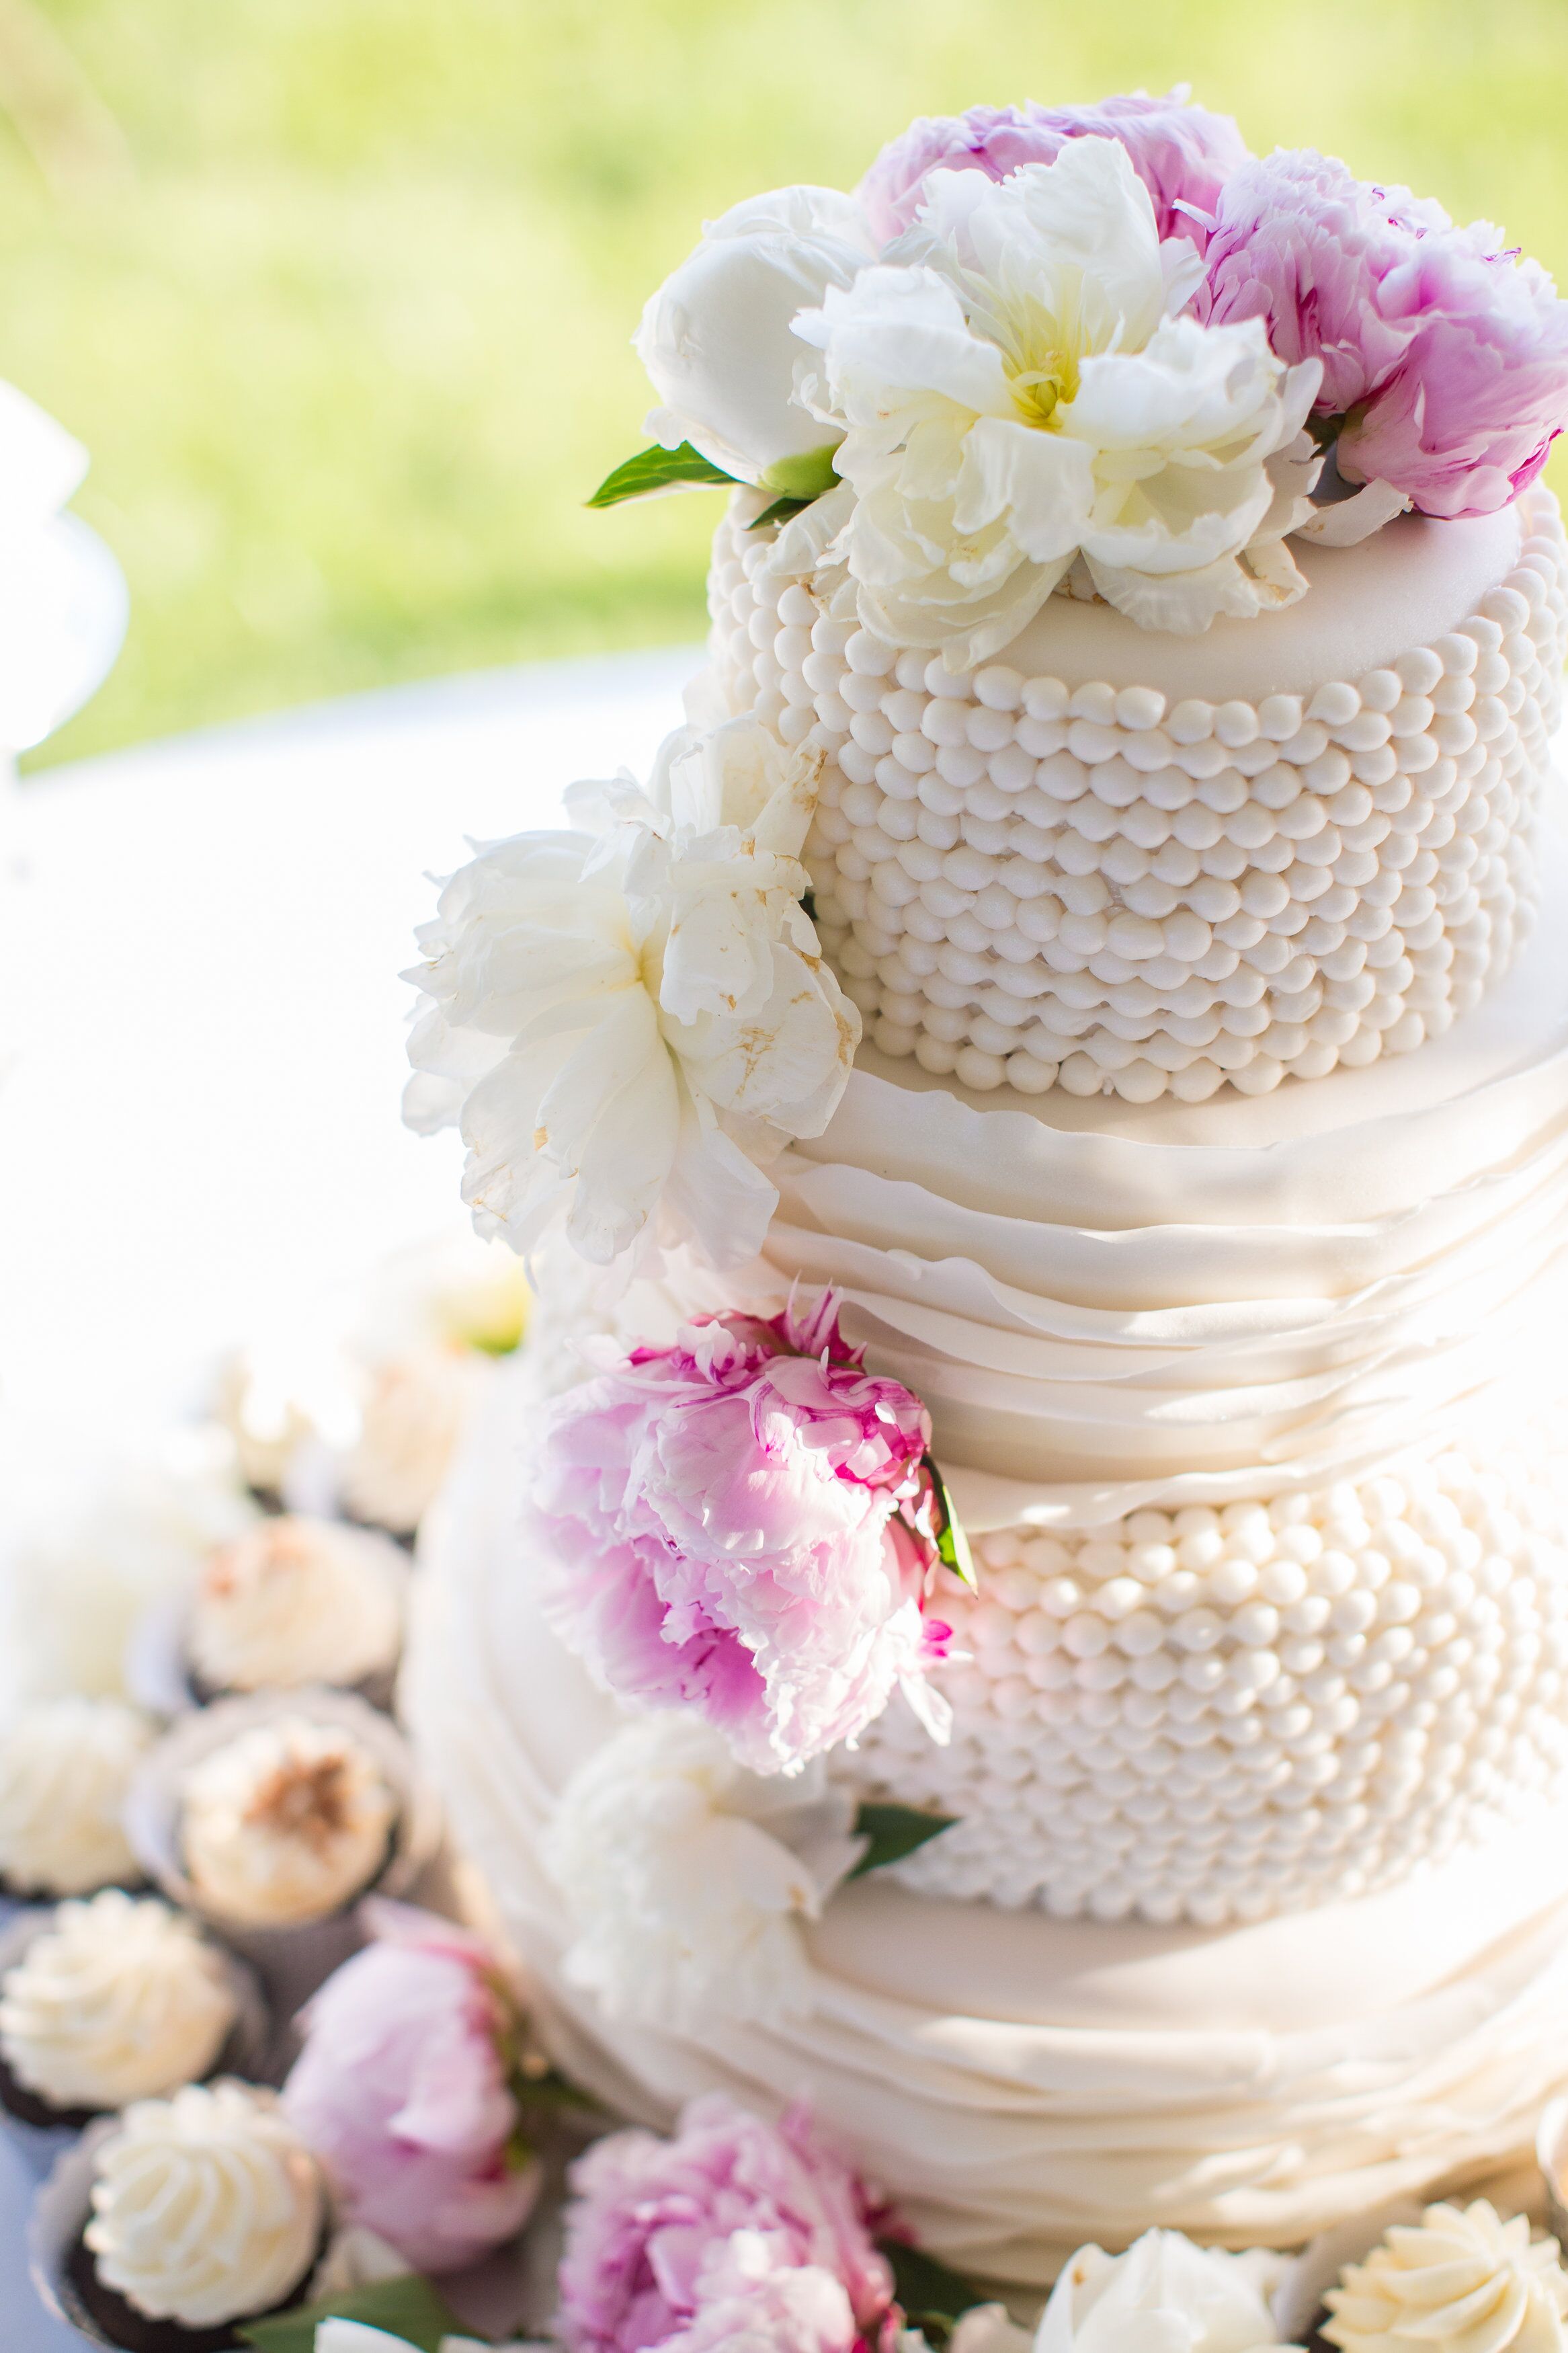  Wedding  Cake  with Peonies  Accents